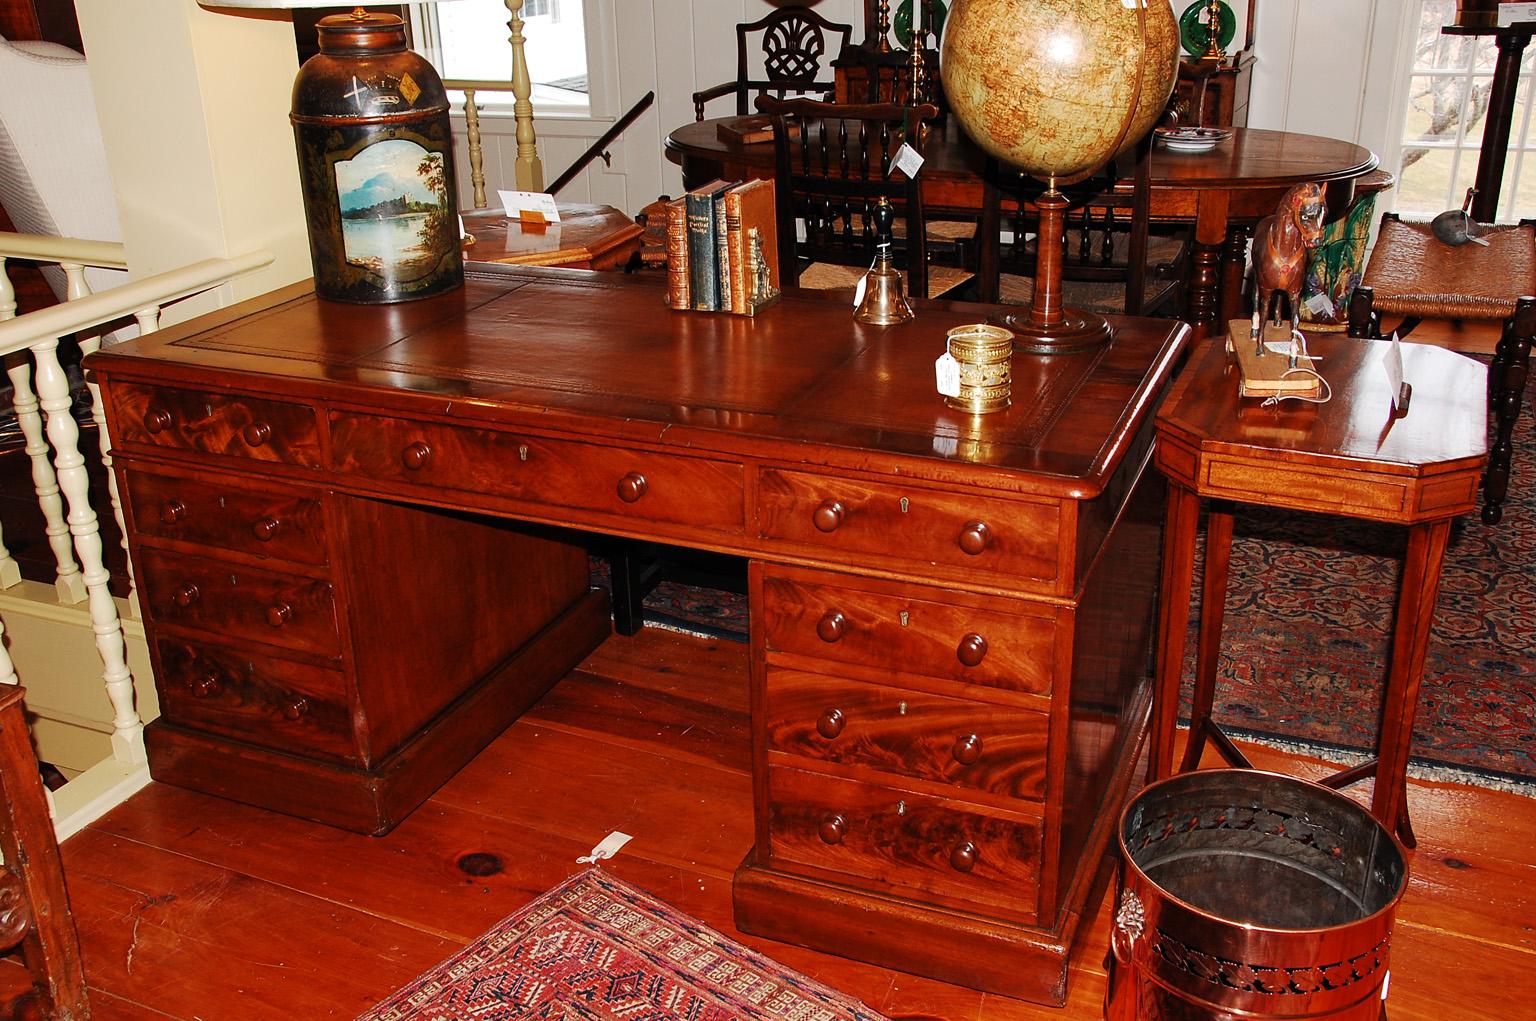 English mid 19th century mahogany and flame grained mahogany three part pedestal desk. Each of the two pedestals has three drawers and a plinth base. The removable top has three drawers and a replaced rich brown leather hand dyed and tooled writing